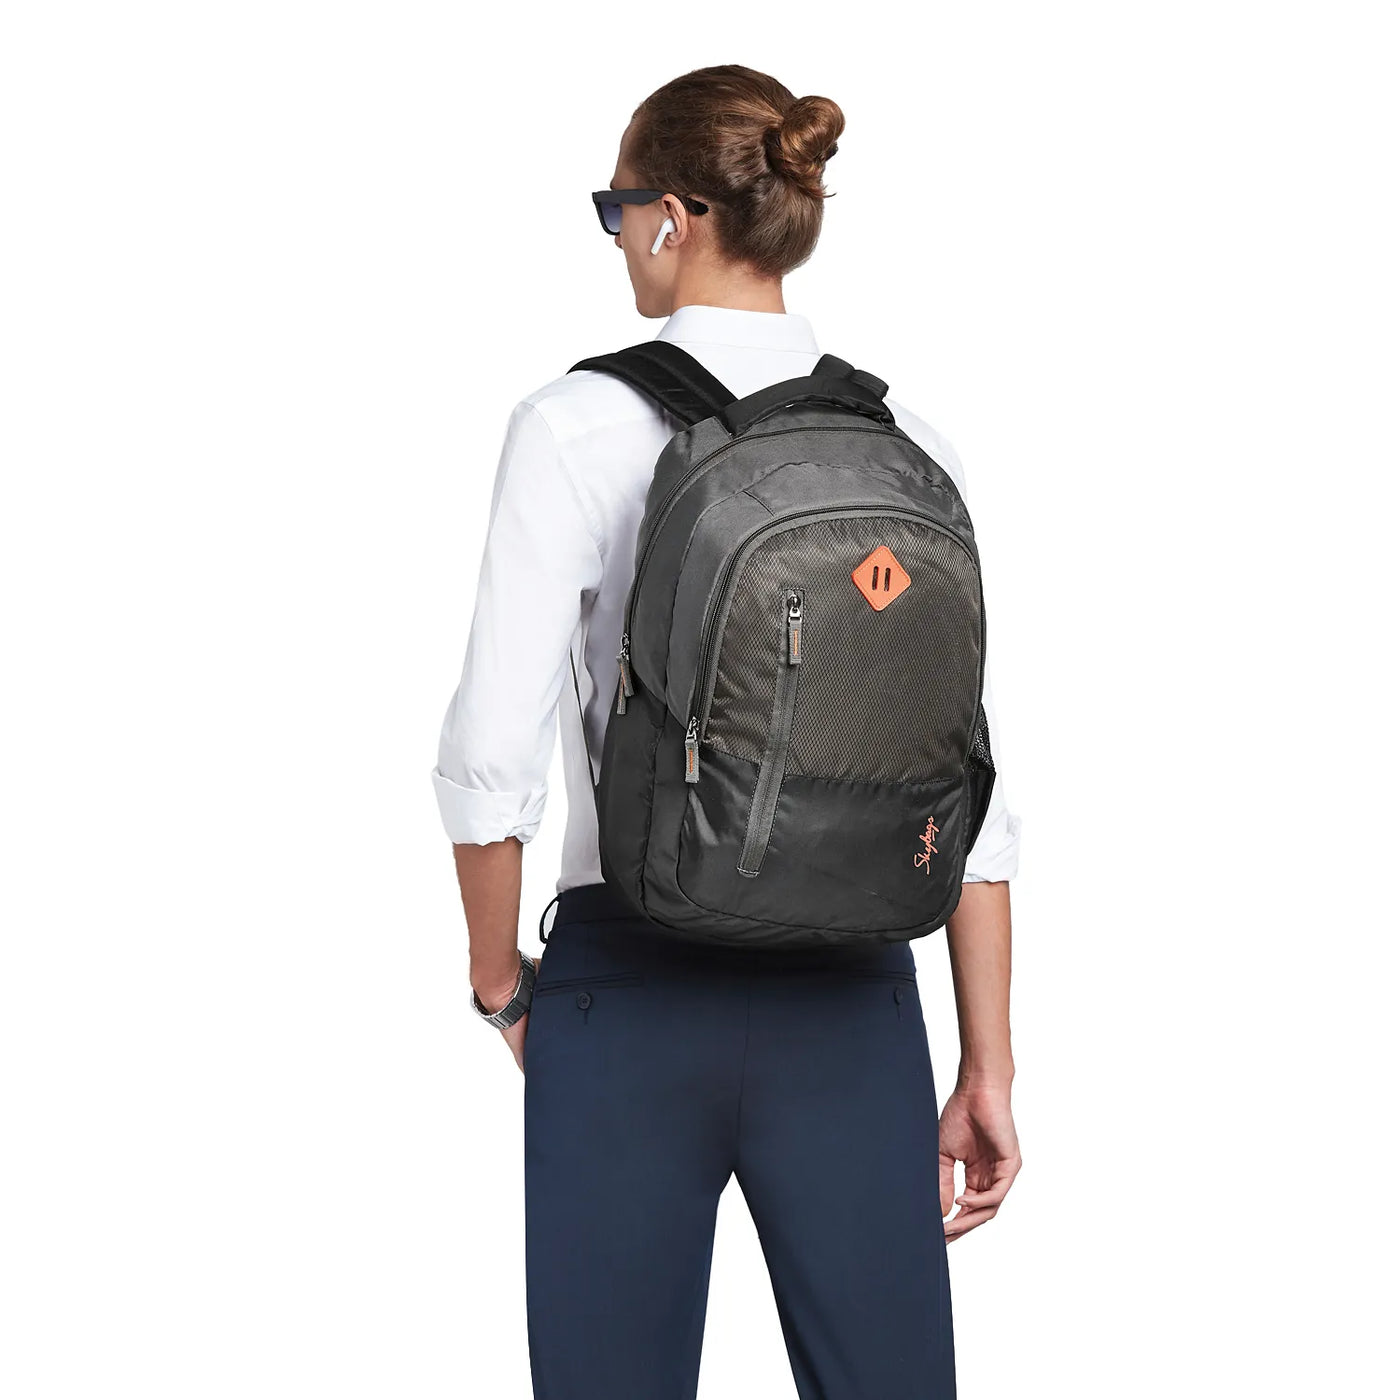 SKYBAGS CHESTER "LAPTOP BACKPACK GREY"